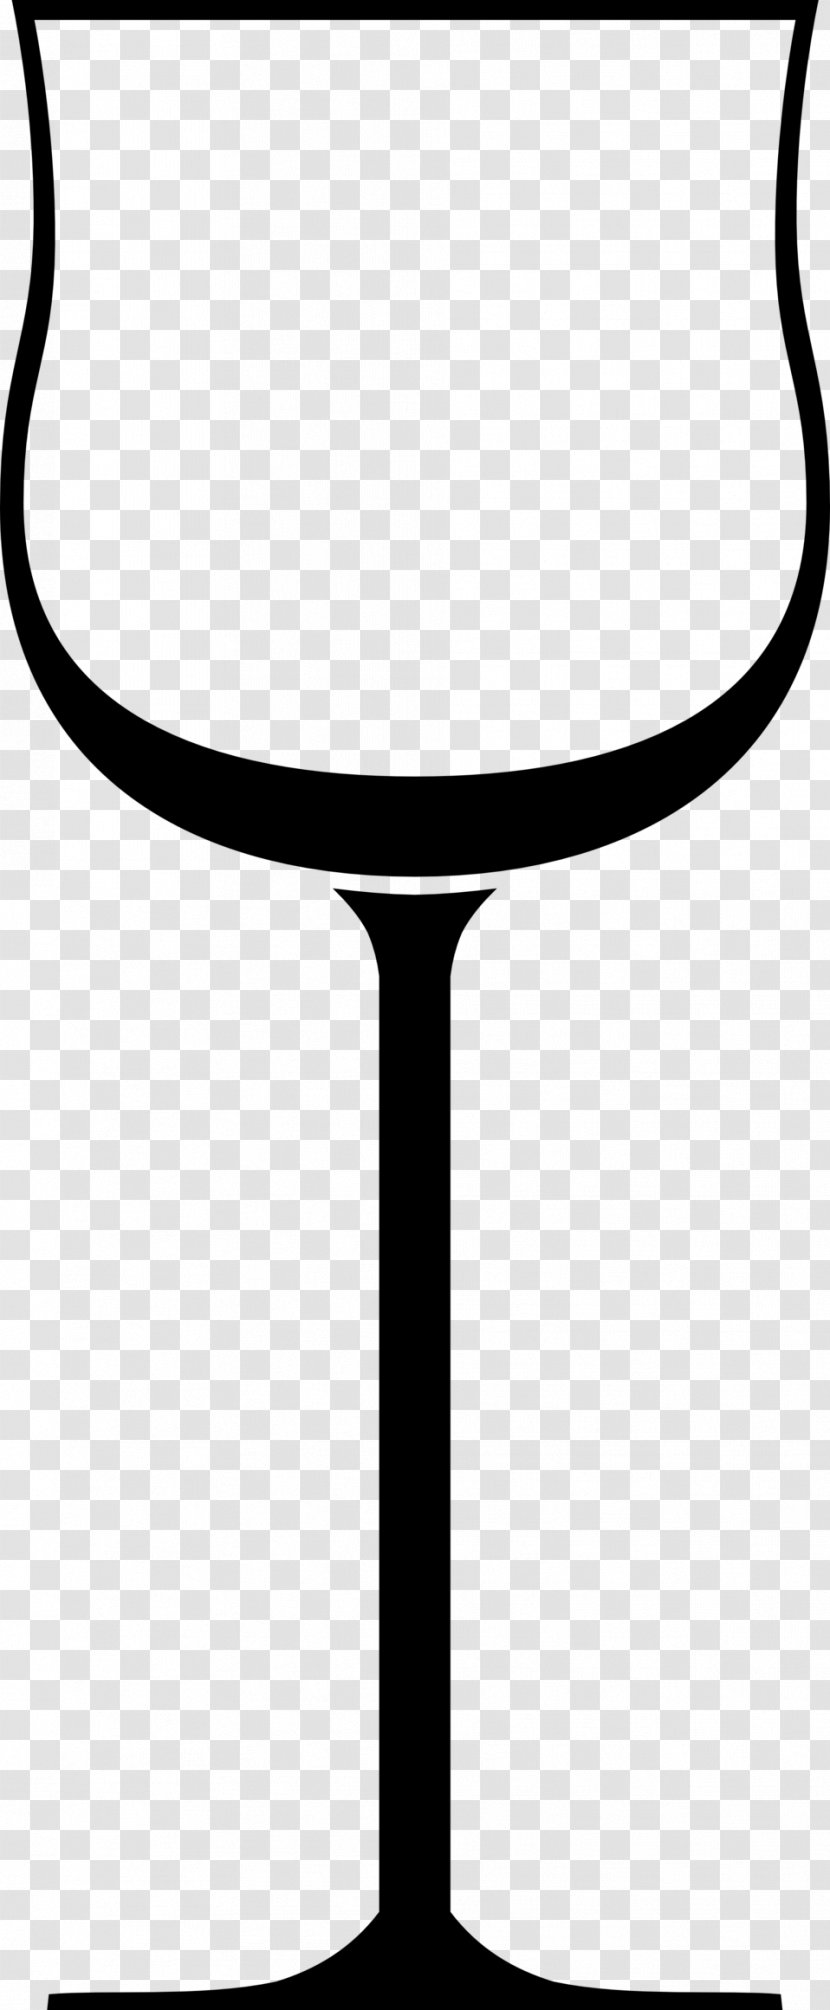 White Wine Glass Clip Art - Wineglass Transparent PNG